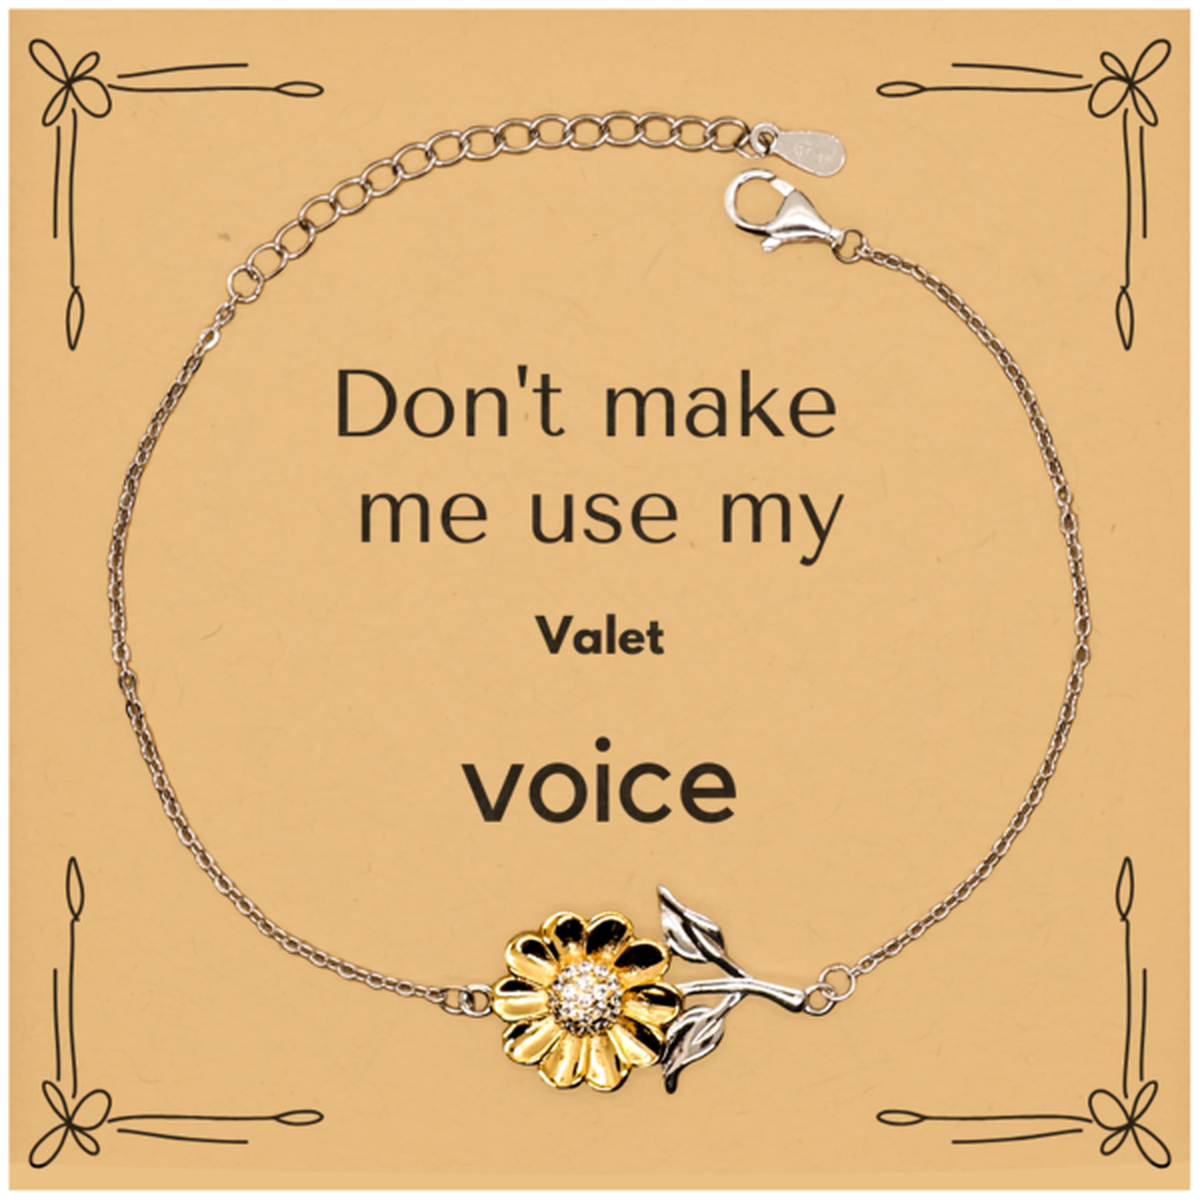 Don't make me use my Valet voice, Sarcasm Valet Card Gifts, Christmas Valet Sunflower Bracelet Birthday Unique Gifts For Valet Coworkers, Men, Women, Colleague, Friends